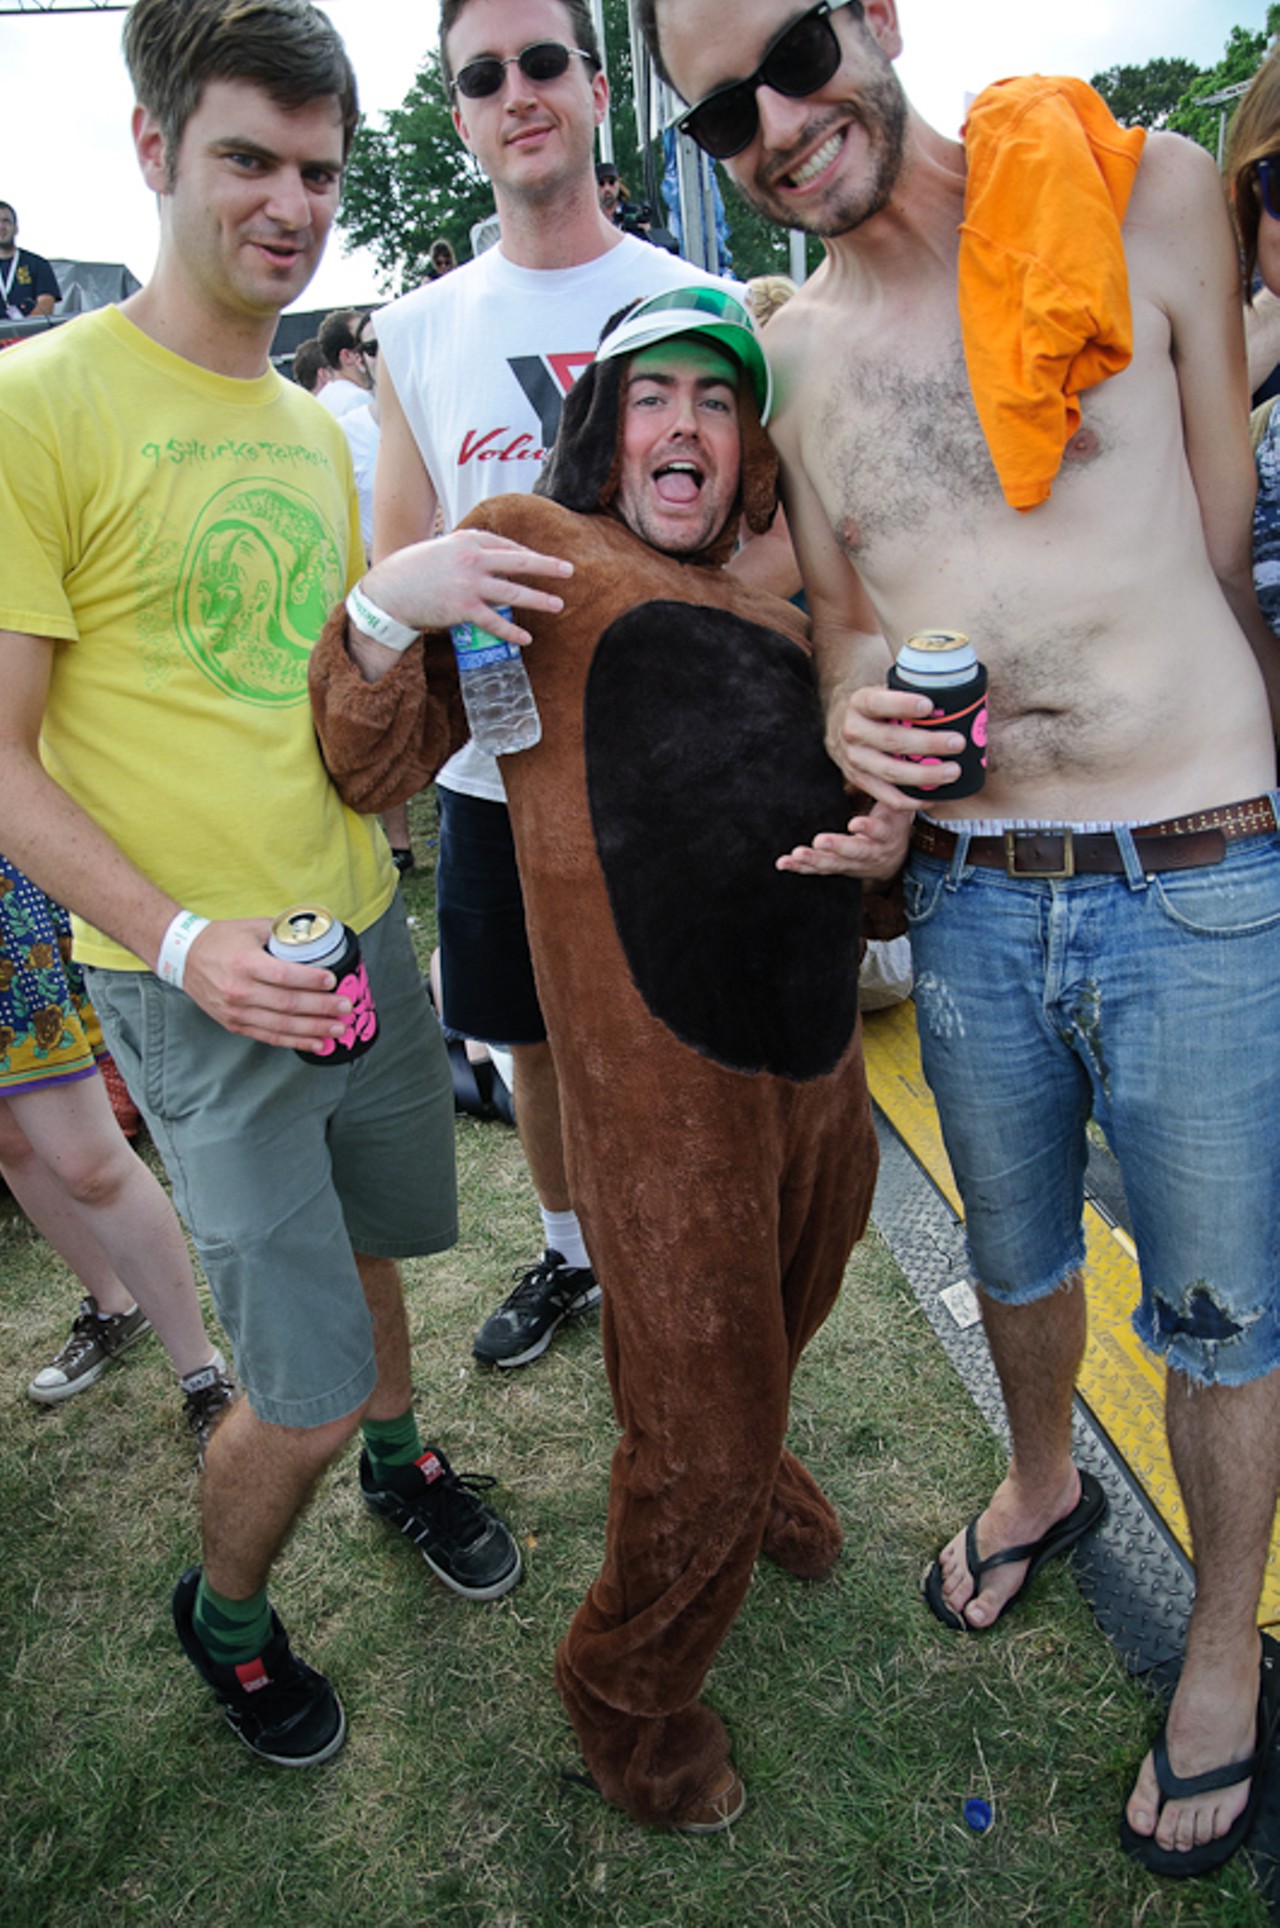 A bear costume was absolutely an odd choice of attire, but screw it -- having a good time trumps all.